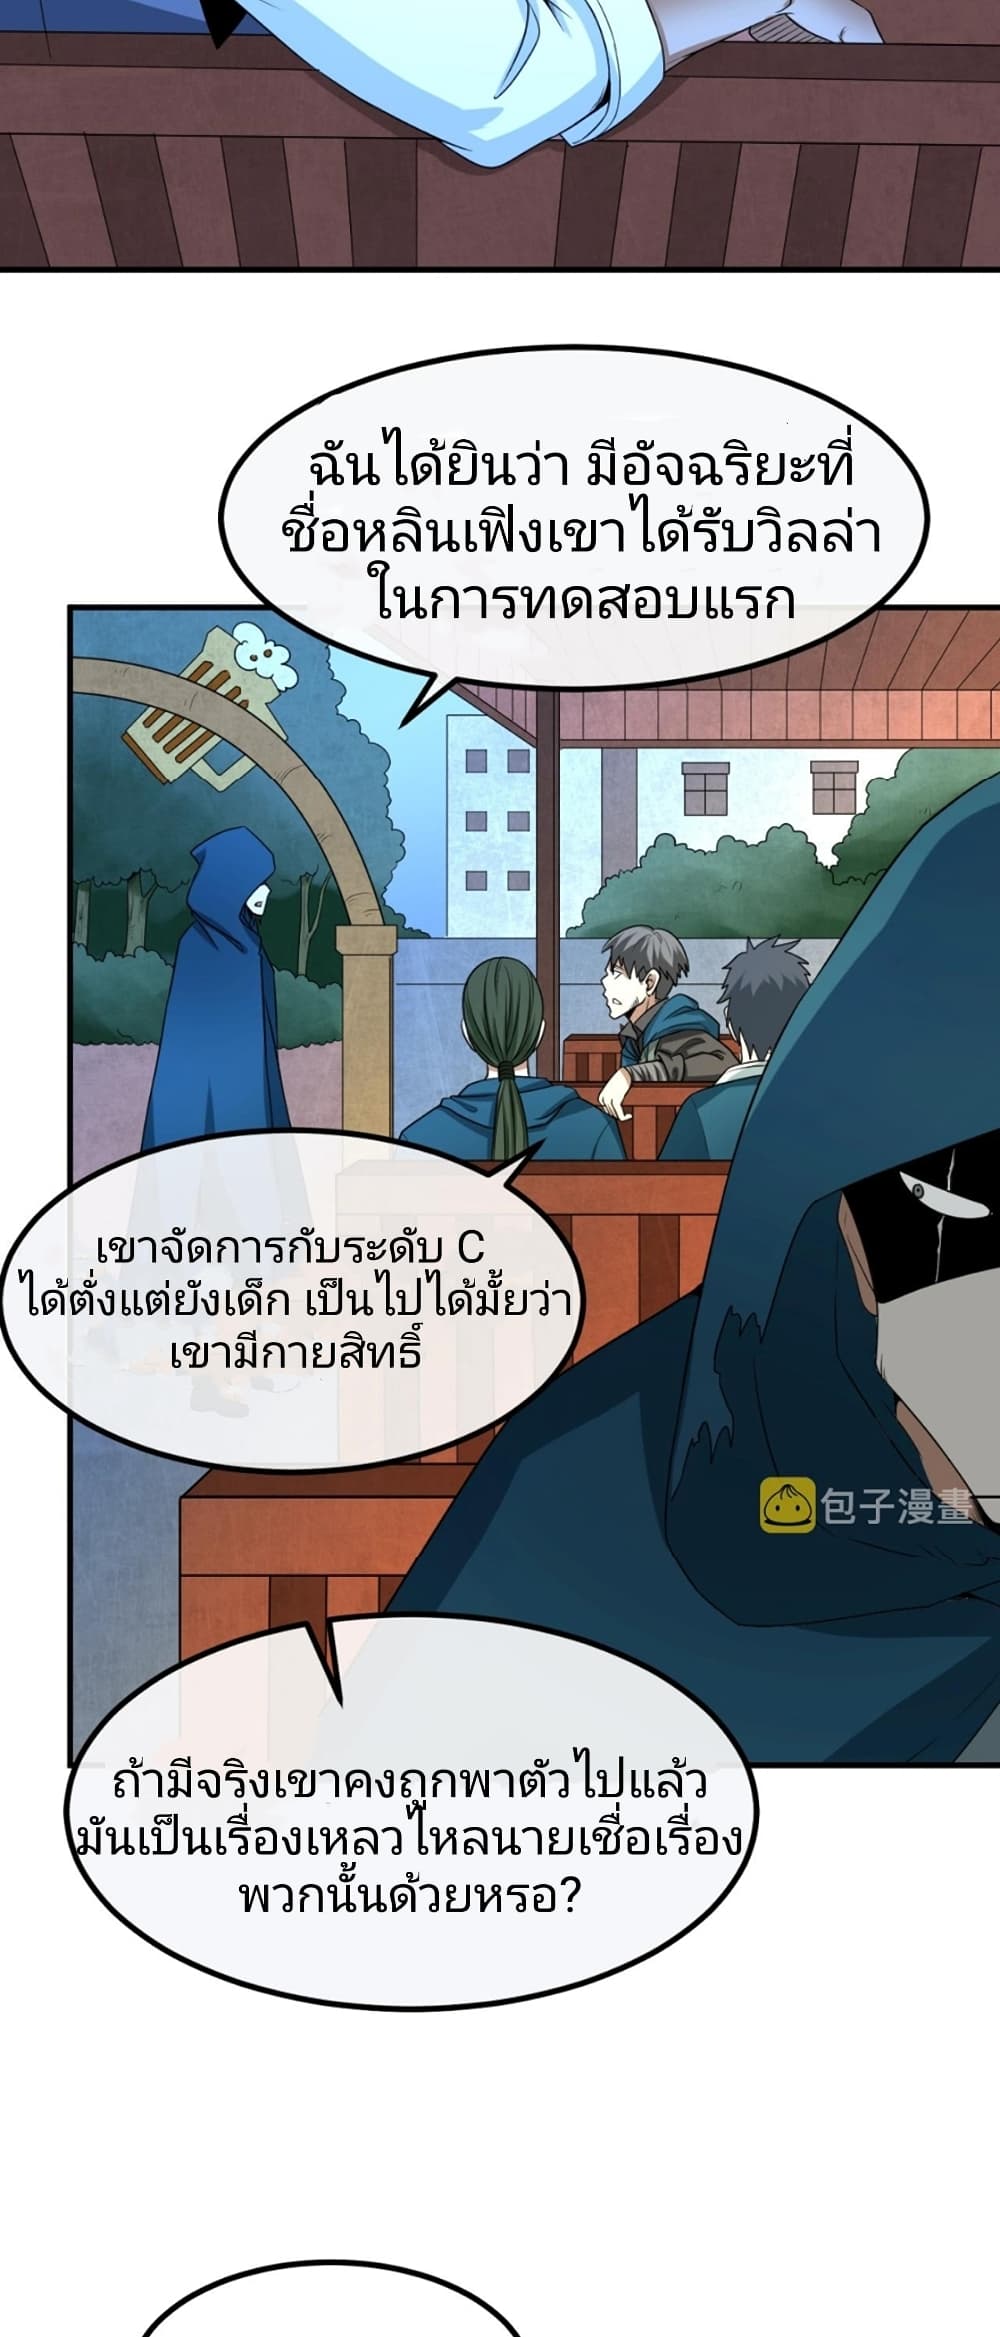 The Age of Ghost Spirits à¸à¸­à¸à¸à¸µà¹ 8 (51)